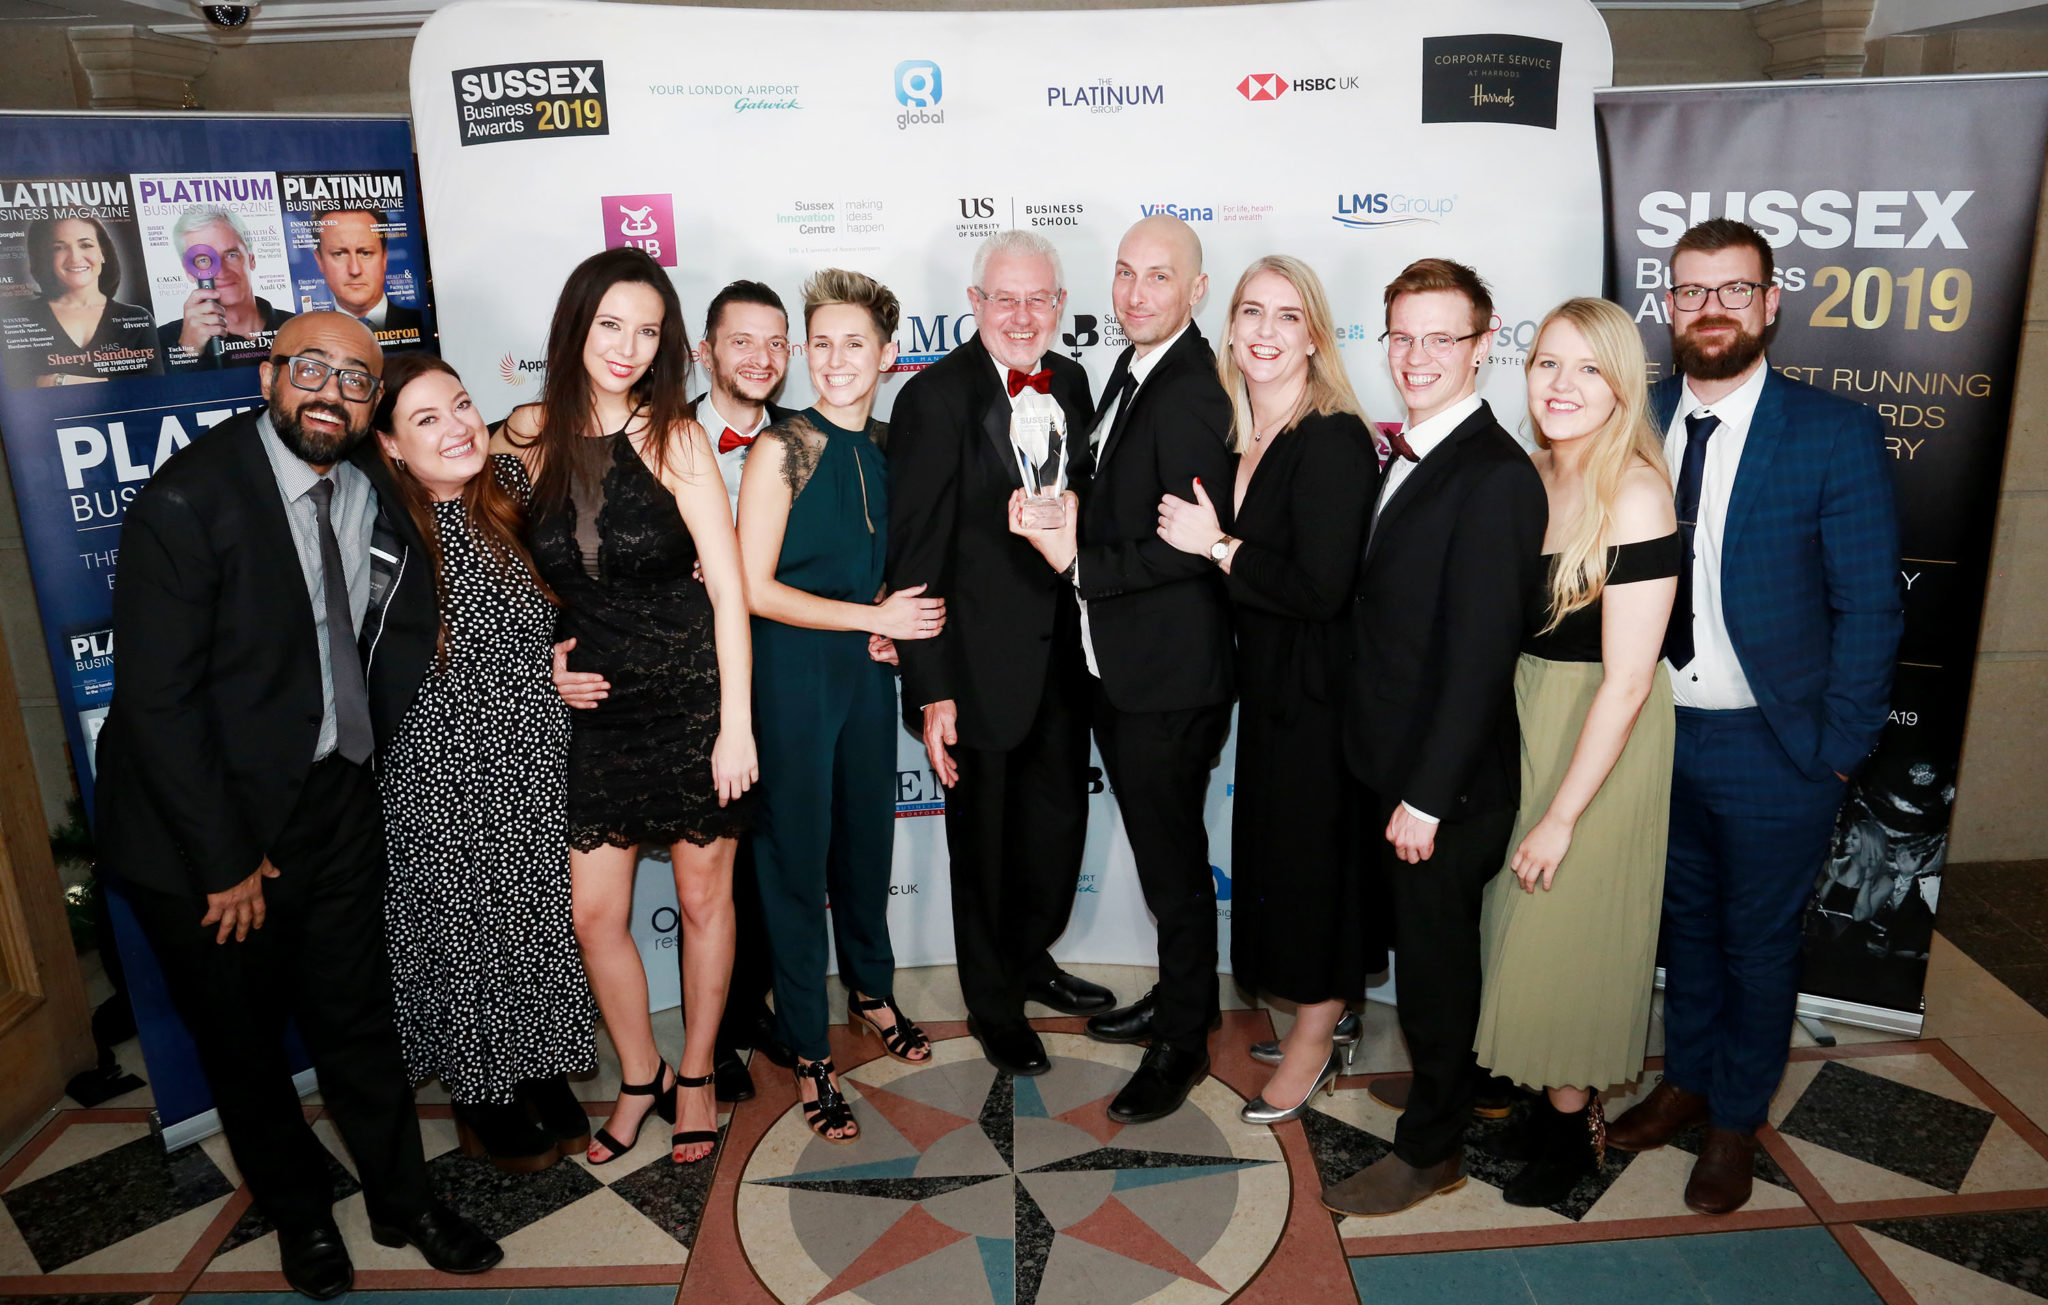 Sussex Business Awards - The Oban Team